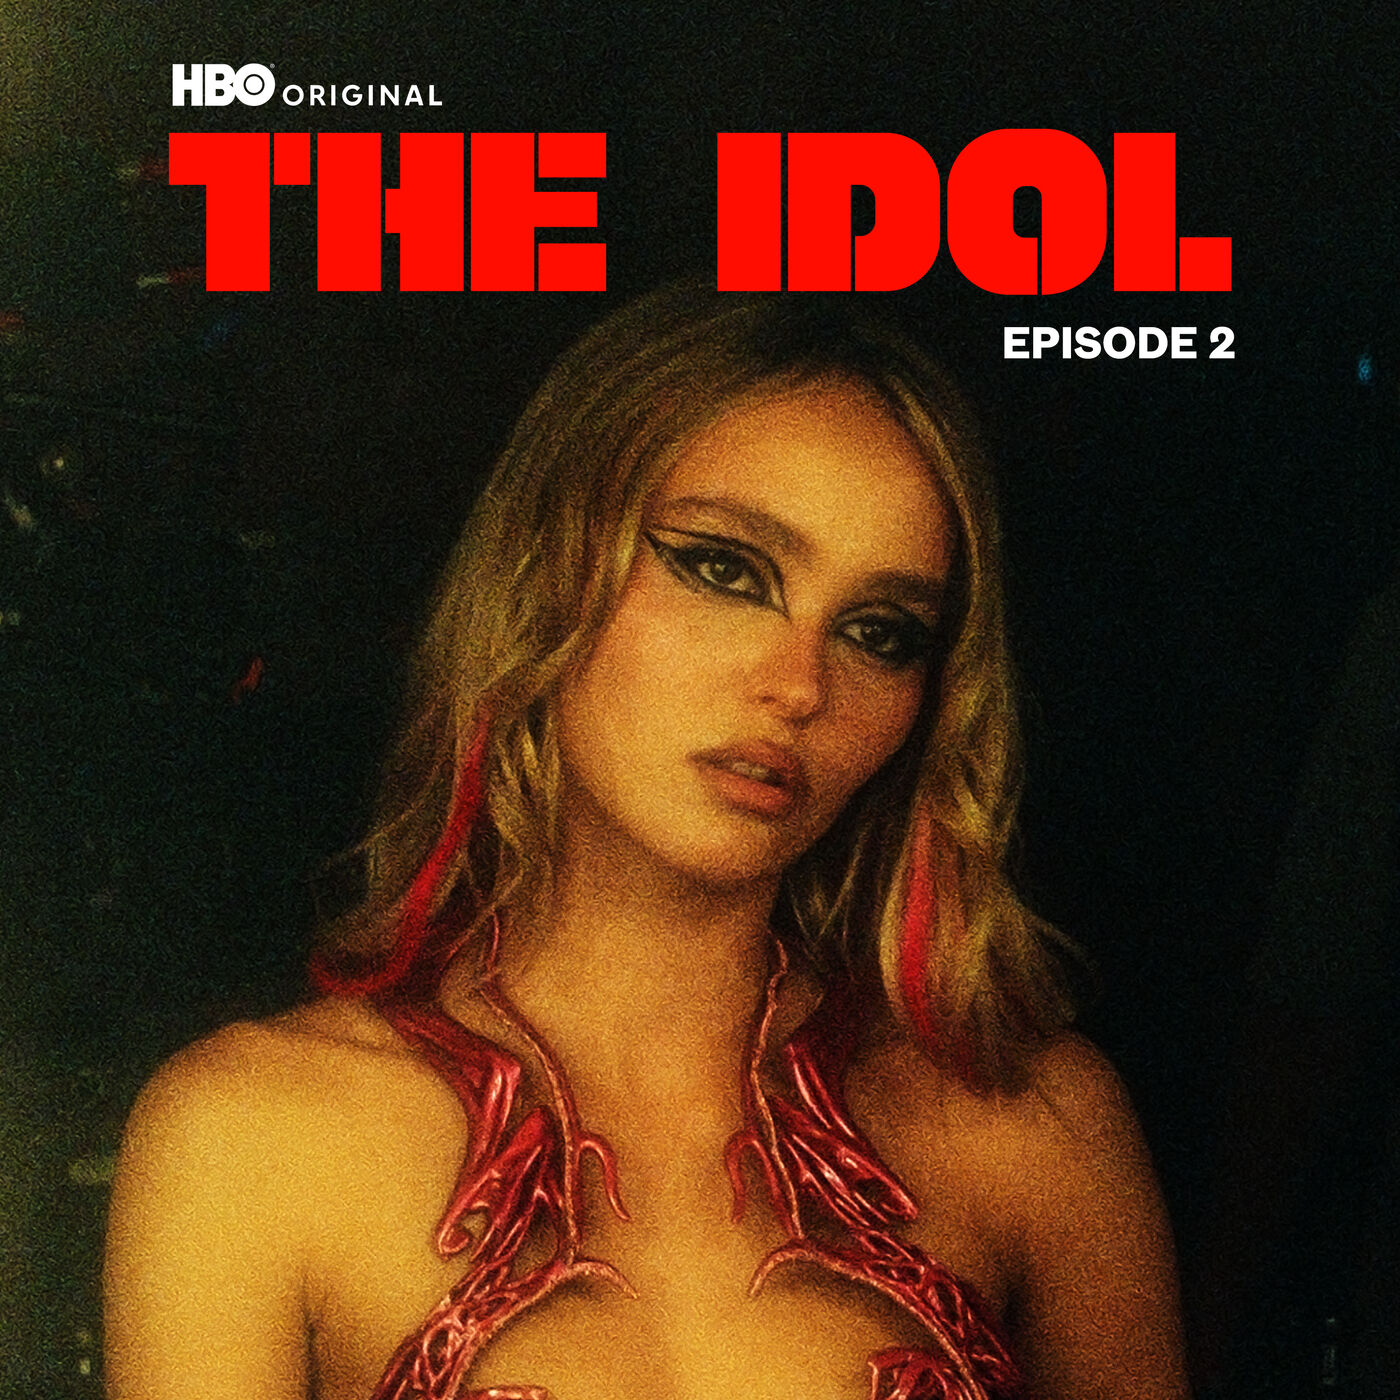 The Weeknd – The Idol Episode 2 (Music from the HBO Original Series)【44.1kHz／16bit】美国区-OppsUpro音乐帝国